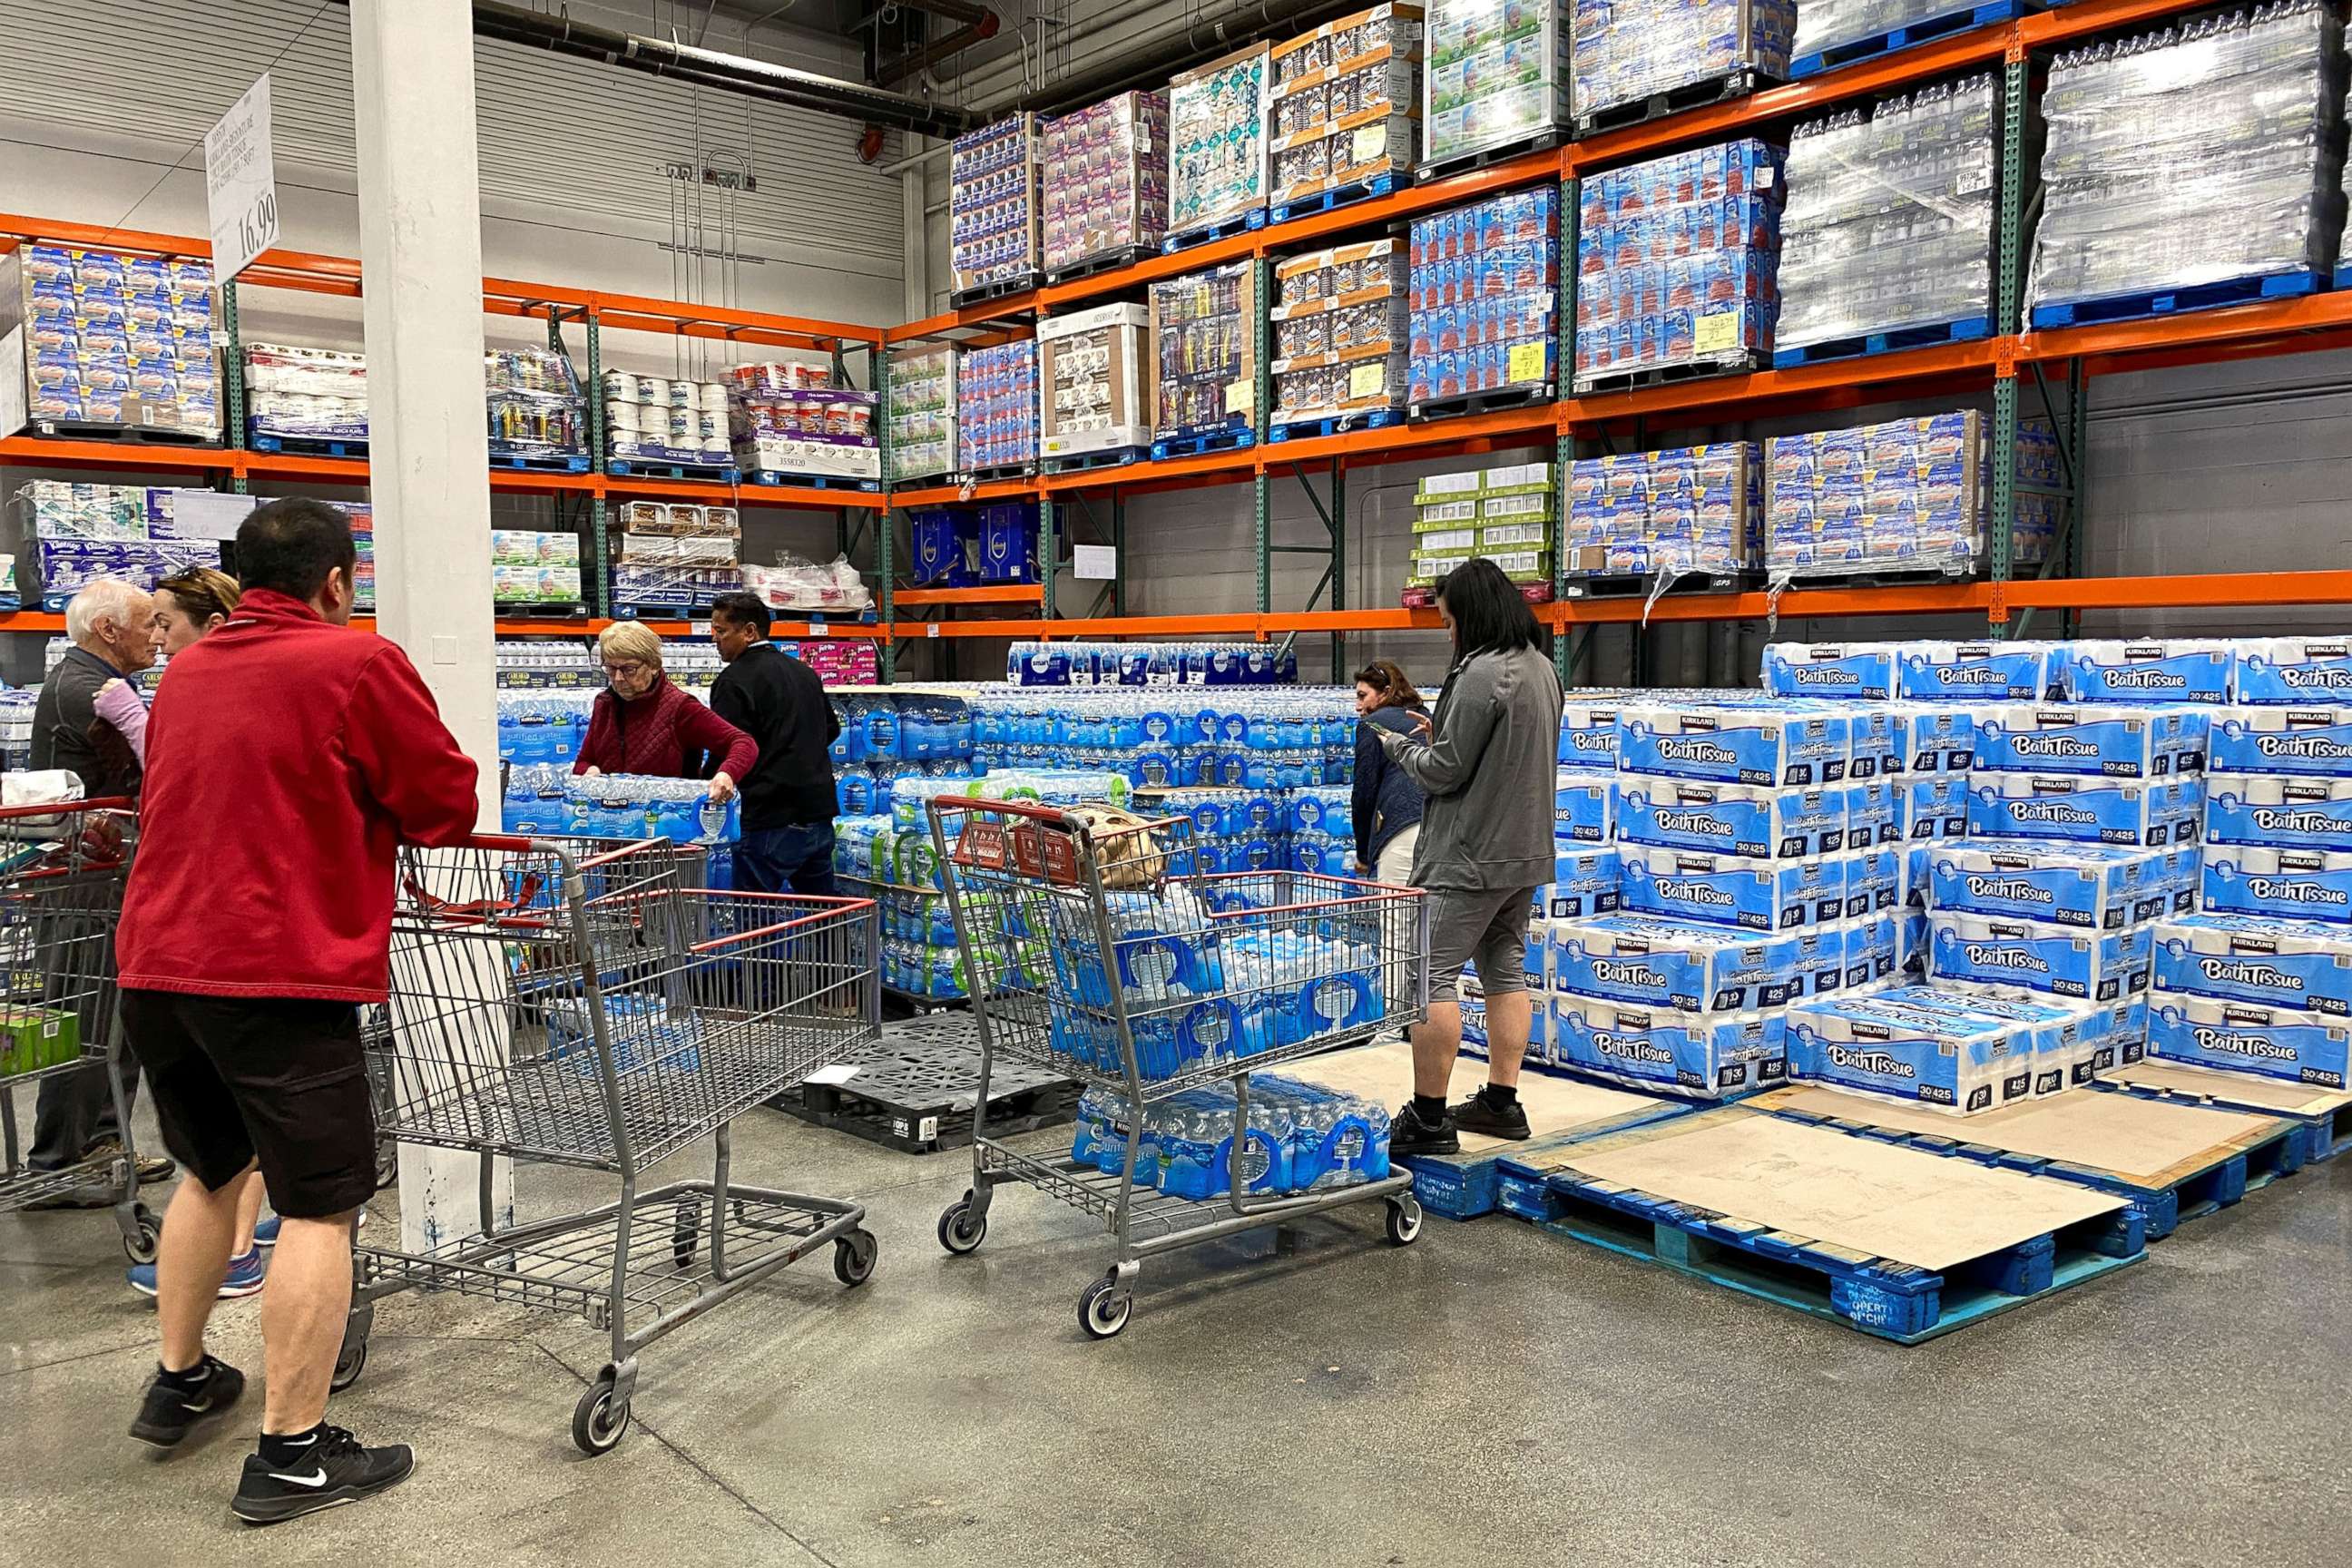 PHOTO: Customers load shopping carts with toilet paper and water at a Costco store in Carlsbad, Calif., March 2, 2020.